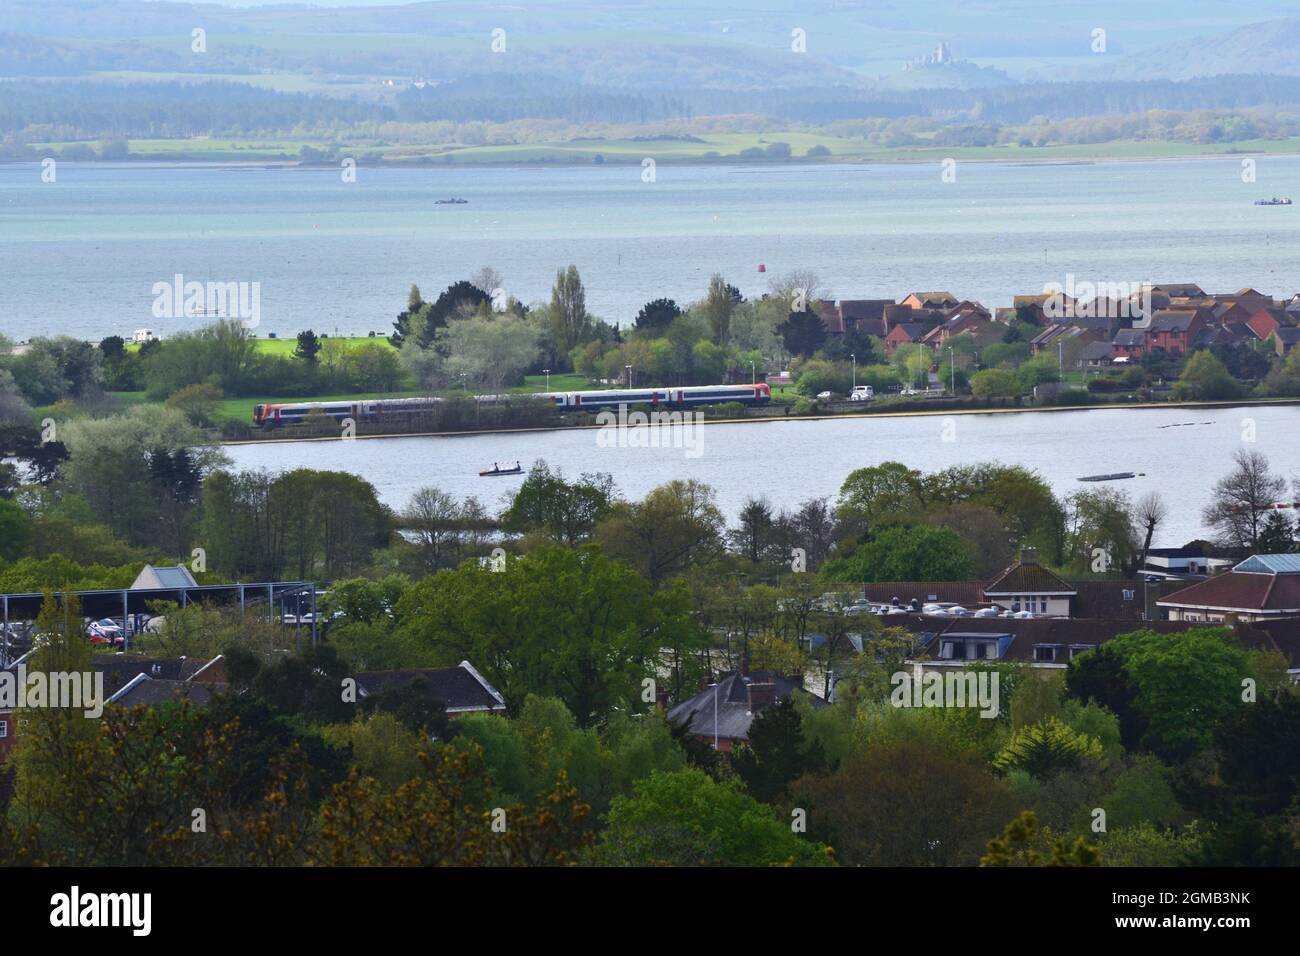 View over Poole Park lake and Poole Harbour, with the Purbeck hills and Corfe Castle in the background. Stock Photo